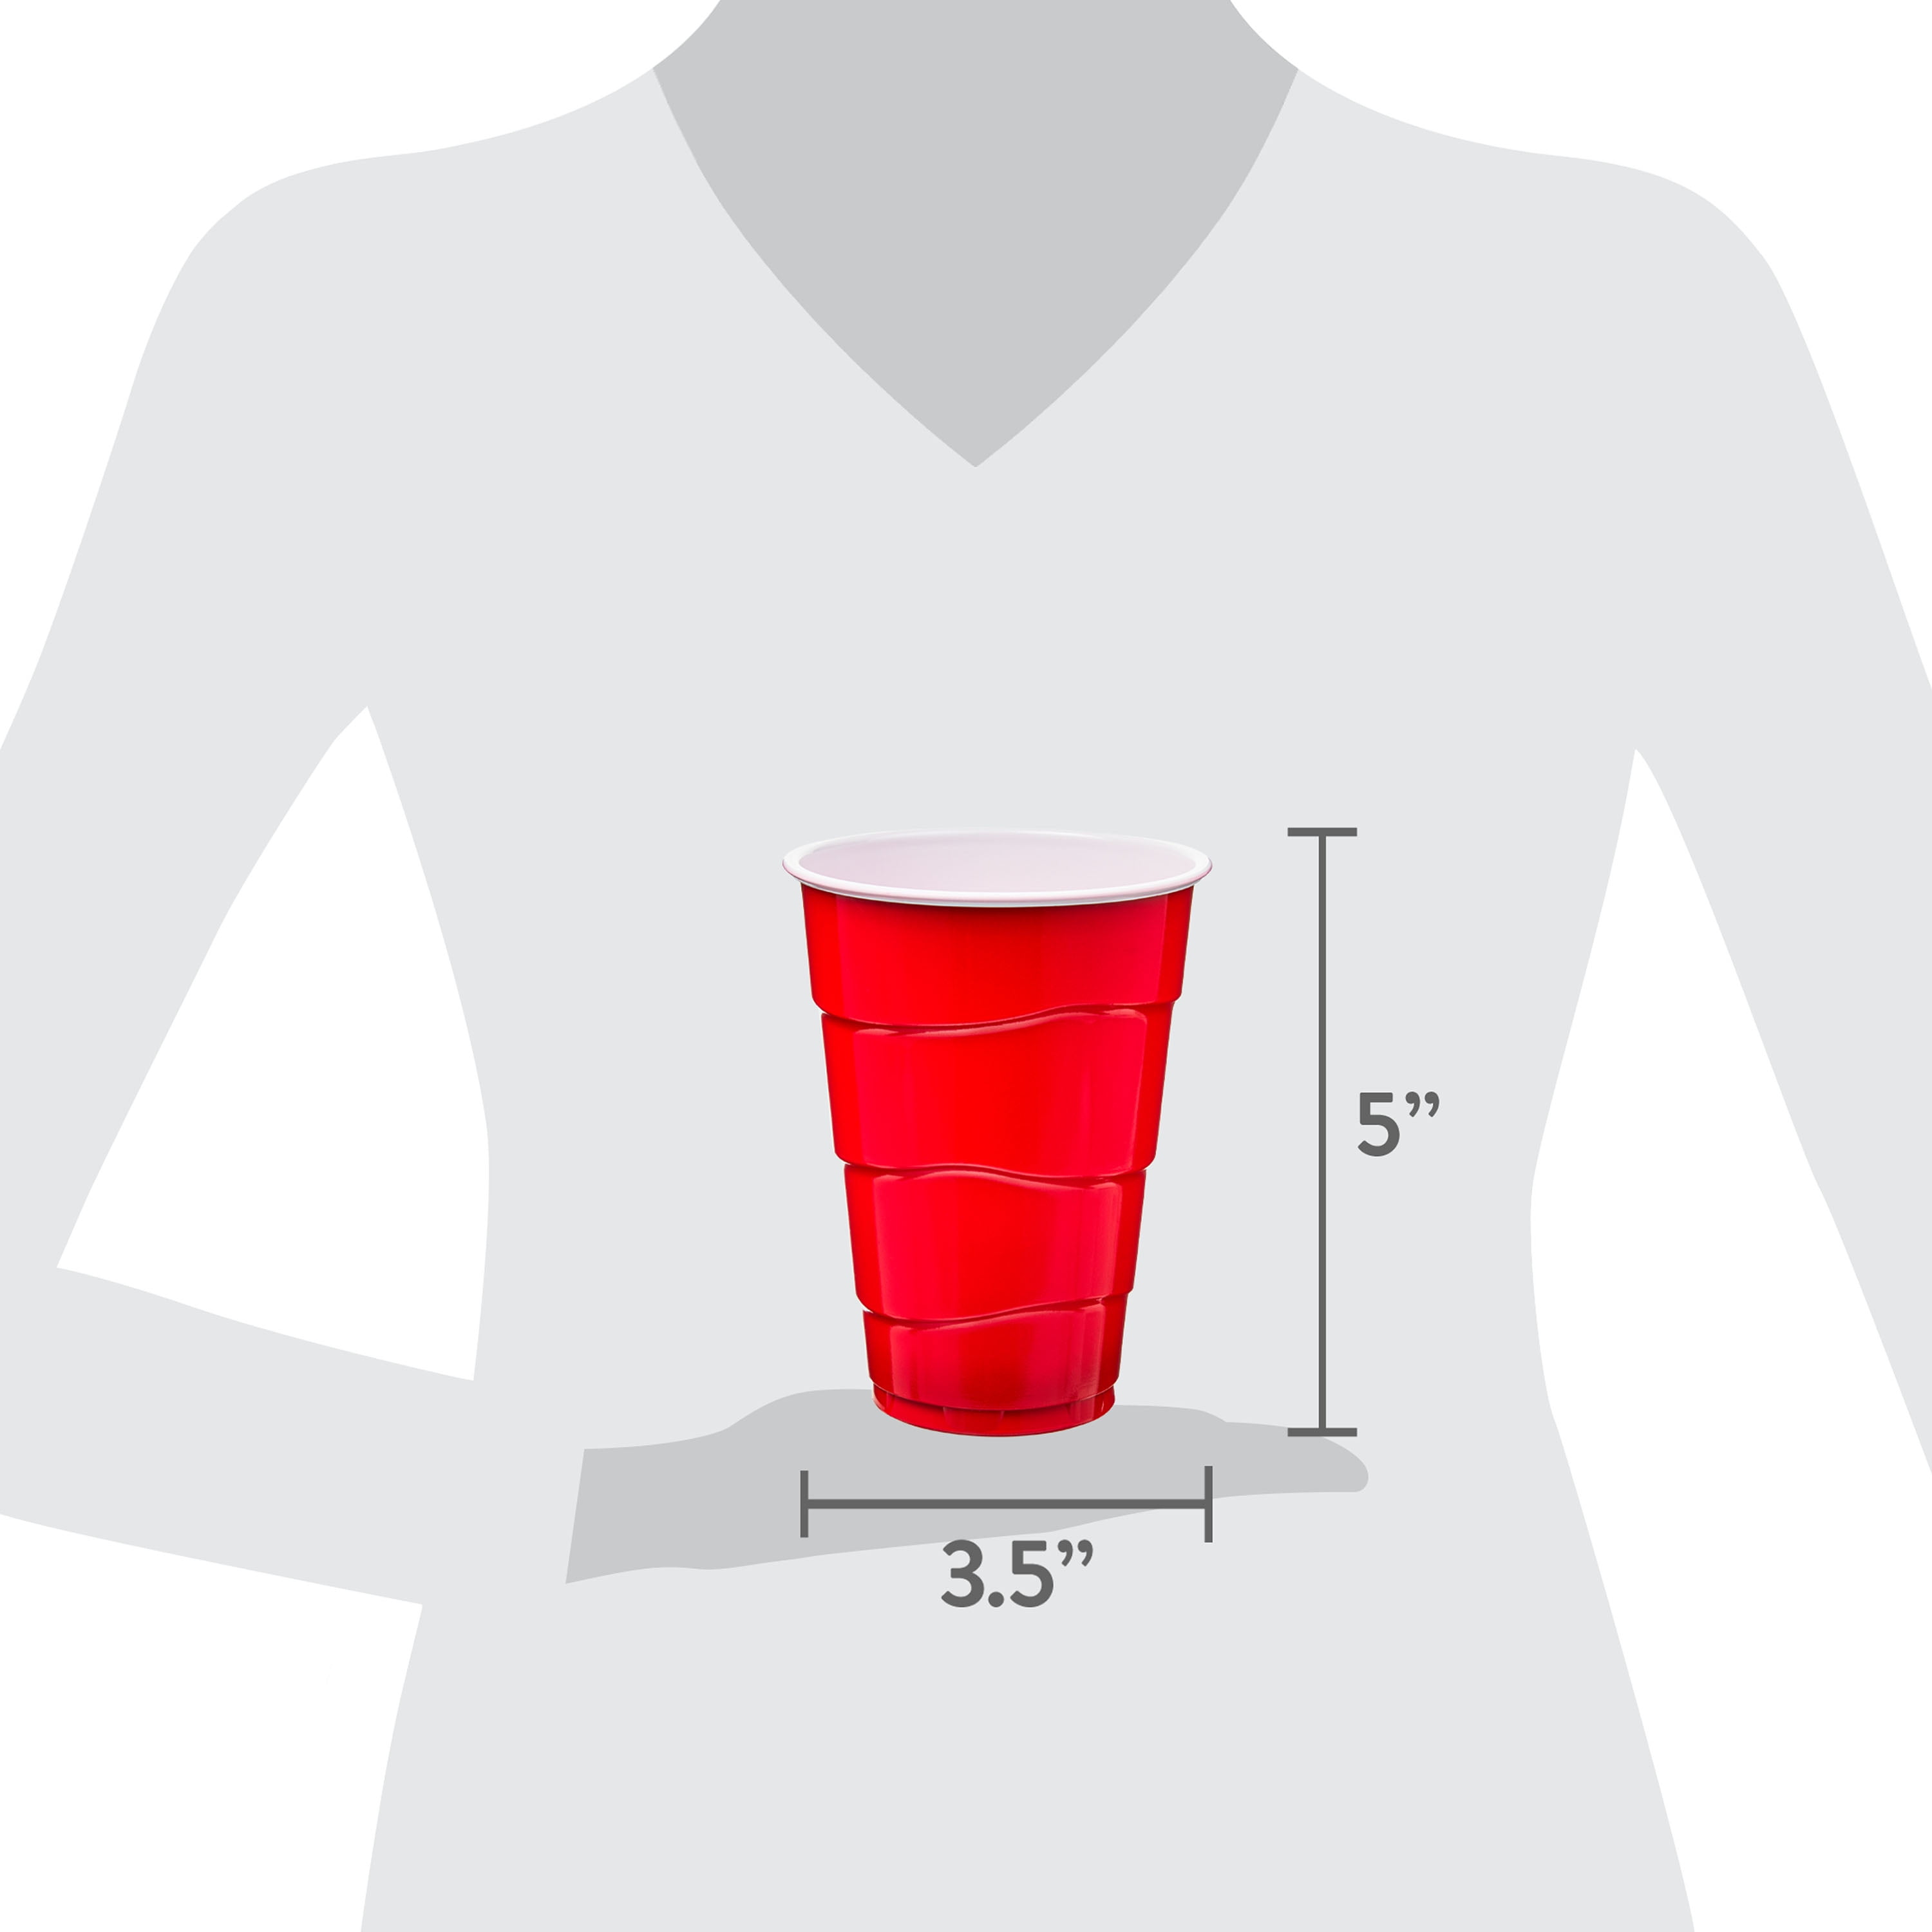 RW Base 16 Ounce Beverage Cups, 500 Disposable Glasses - Heavy Duty, Durable, Red Plastic Drinking Cups, for Birthday Parties, Picnics, or Tailgates